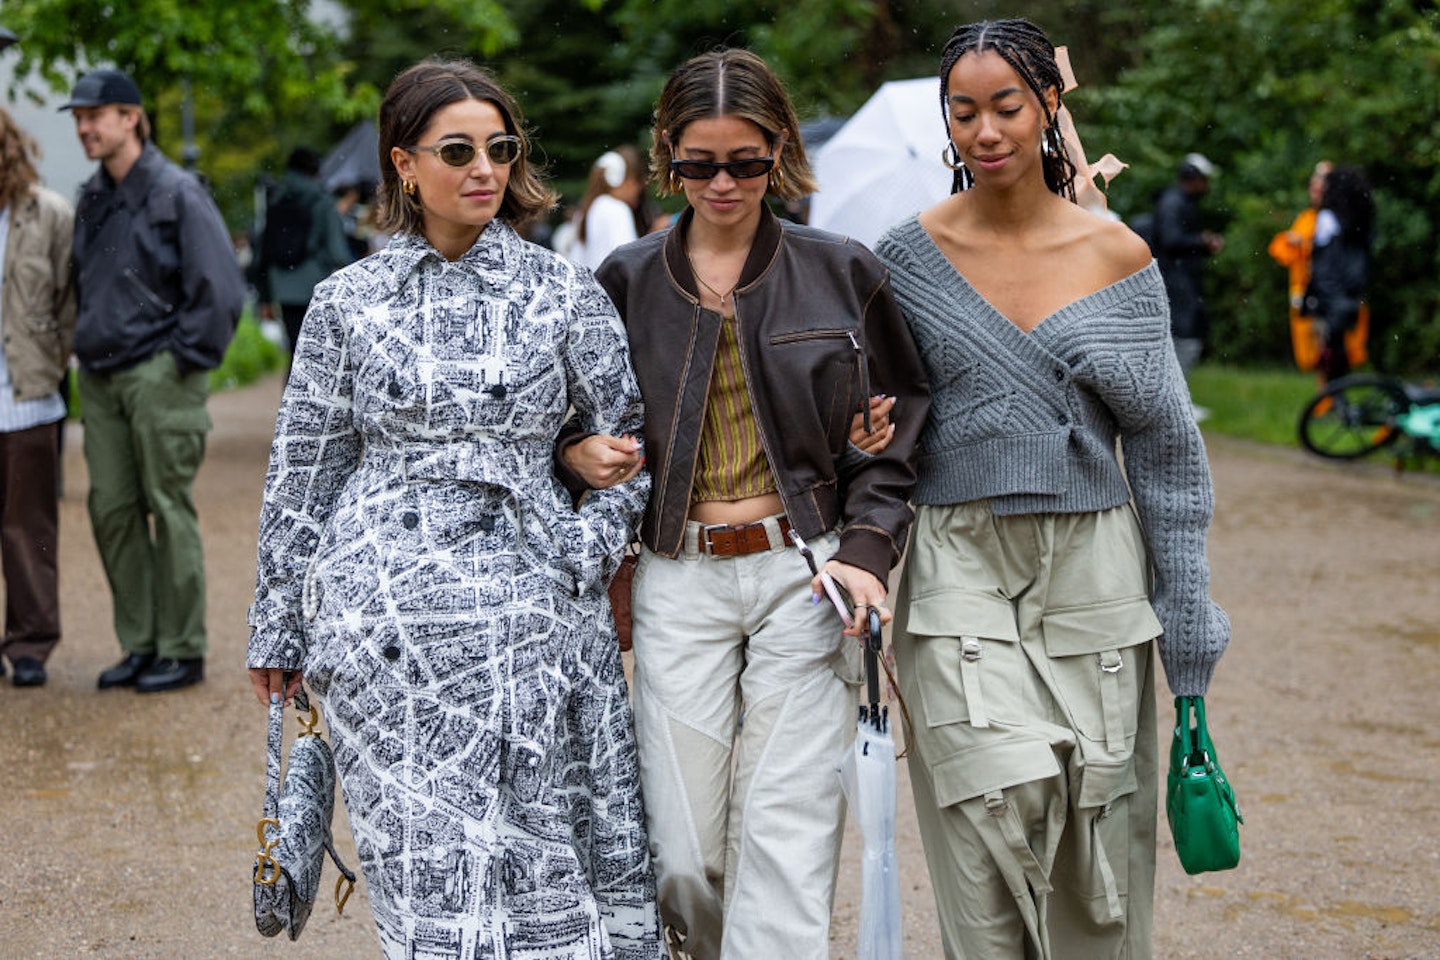 All Of The Best Street Style From New York Fashion Week So Far - Grazia